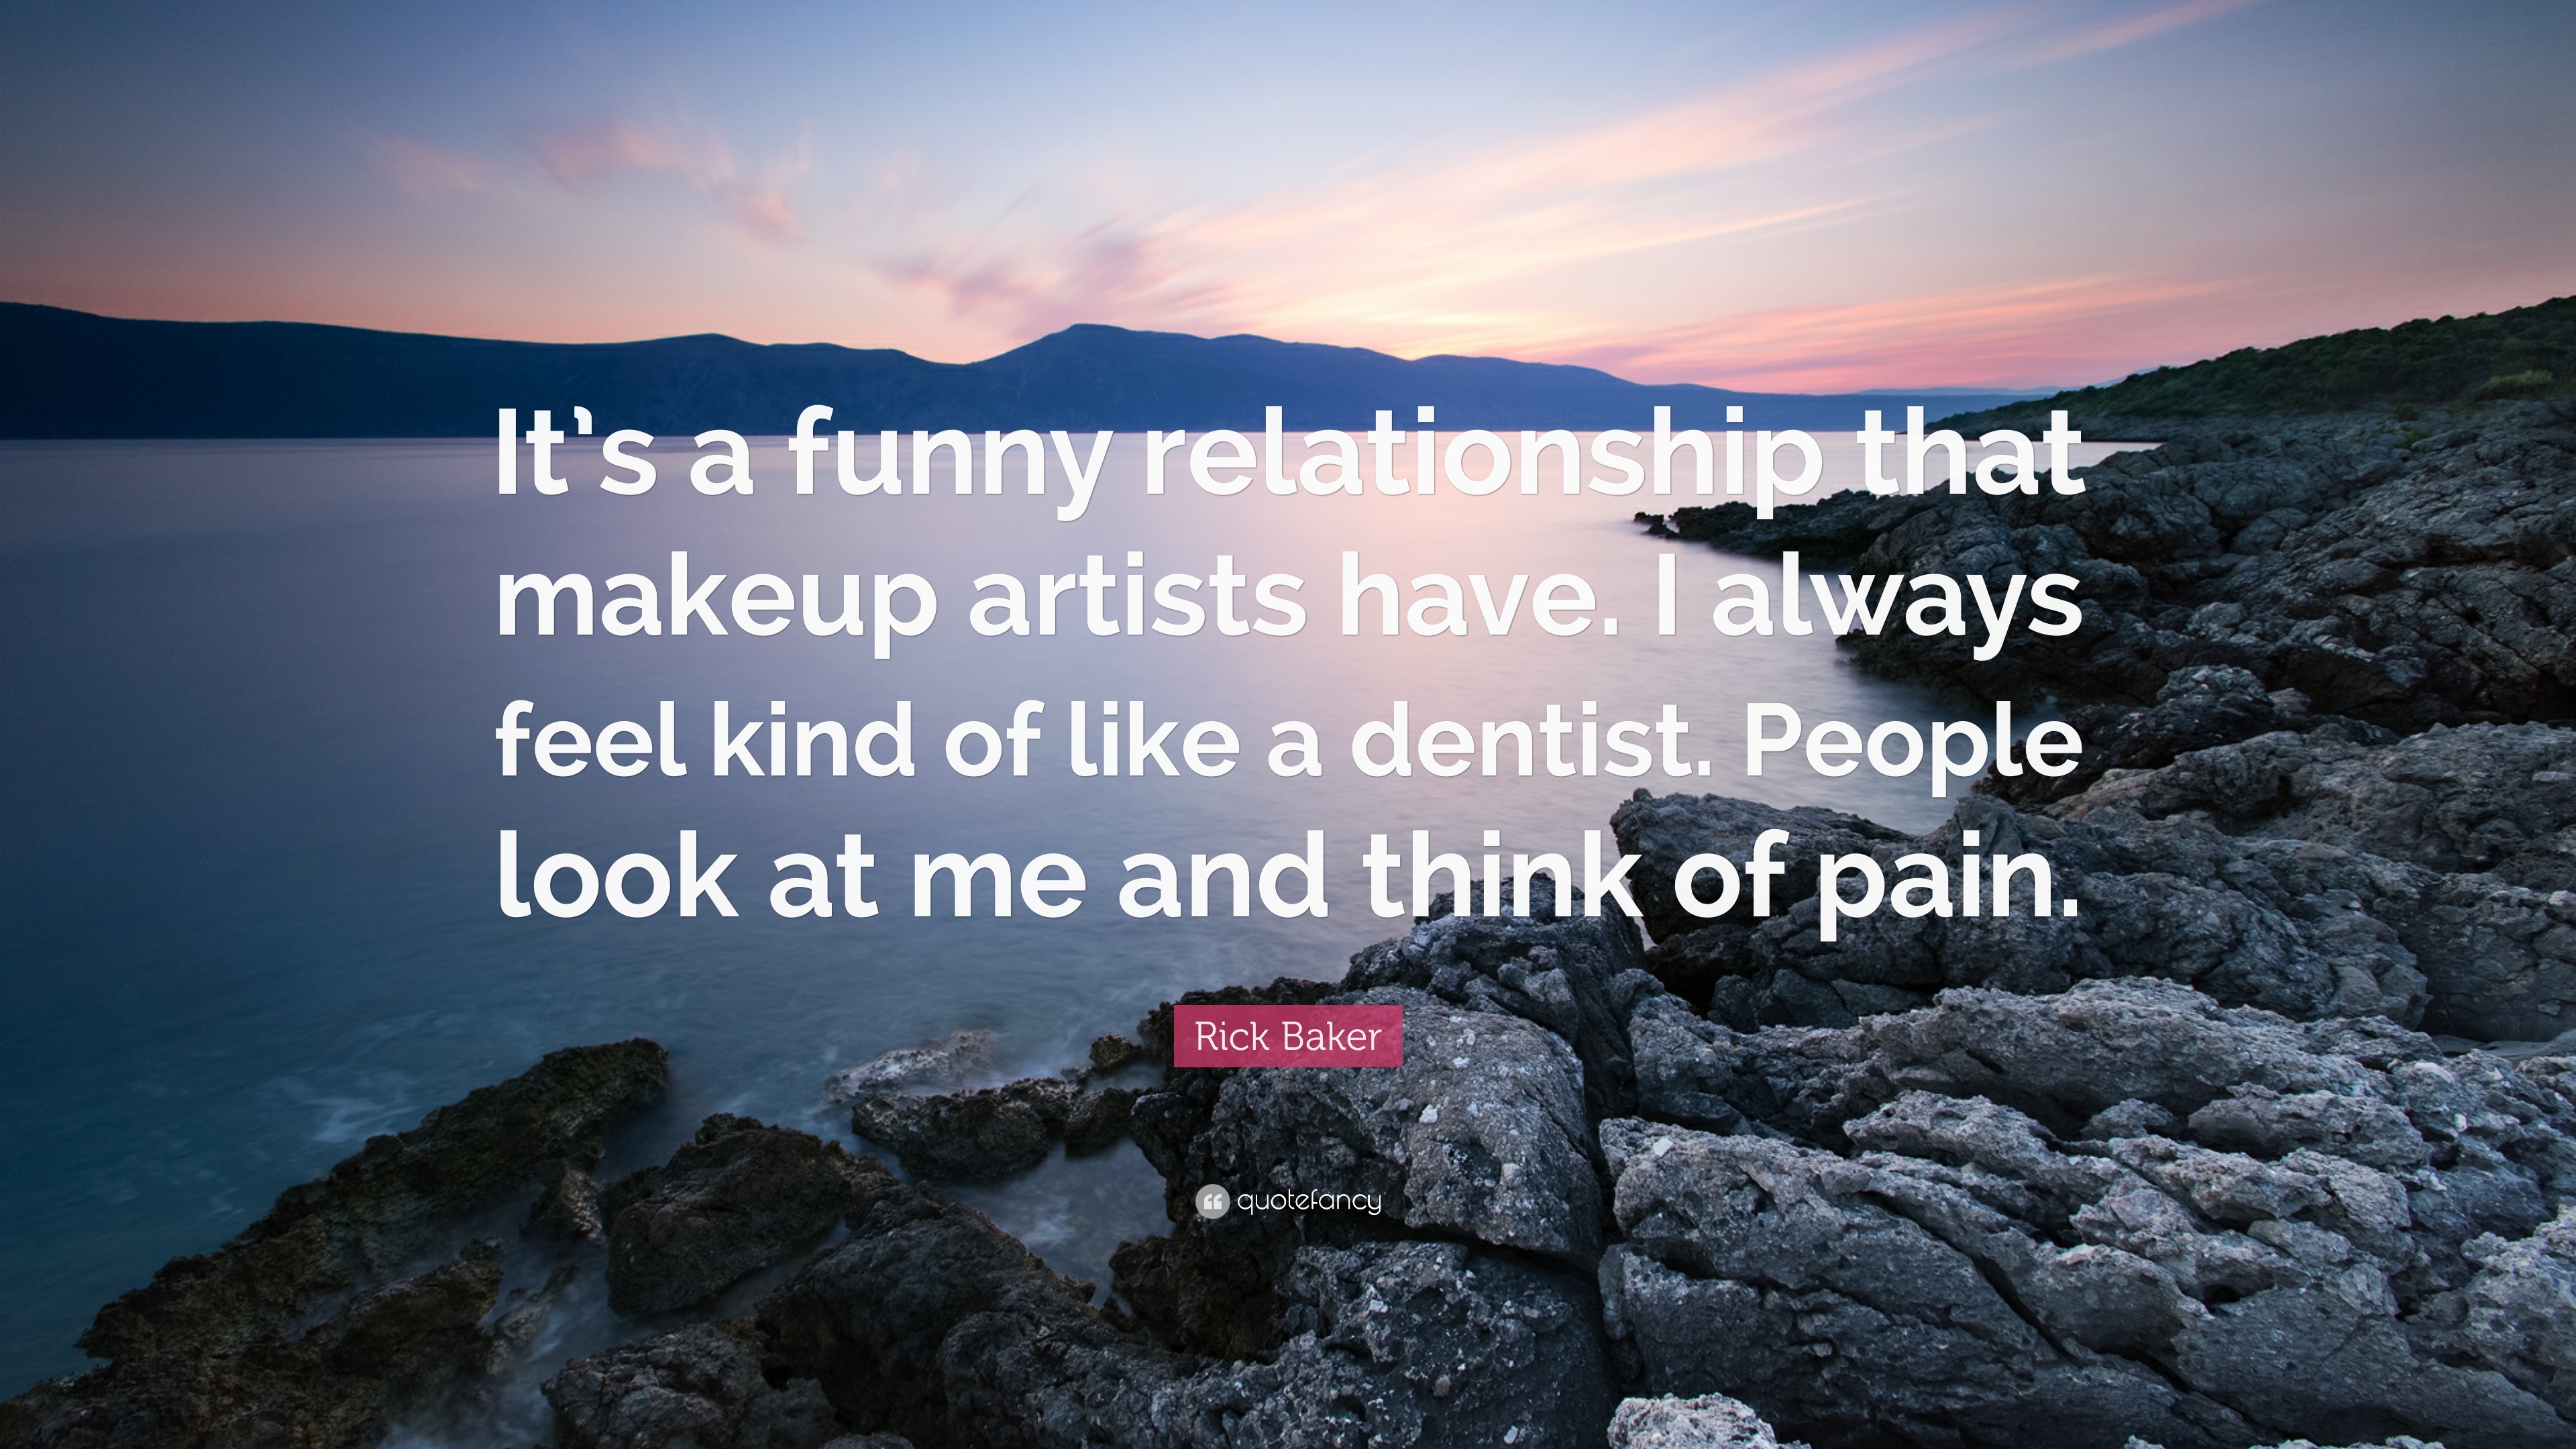 Rick Baker Quote: “It's a funny relationship that makeup artists have. I  always feel kind of like a dentist. People look at me and think of...”